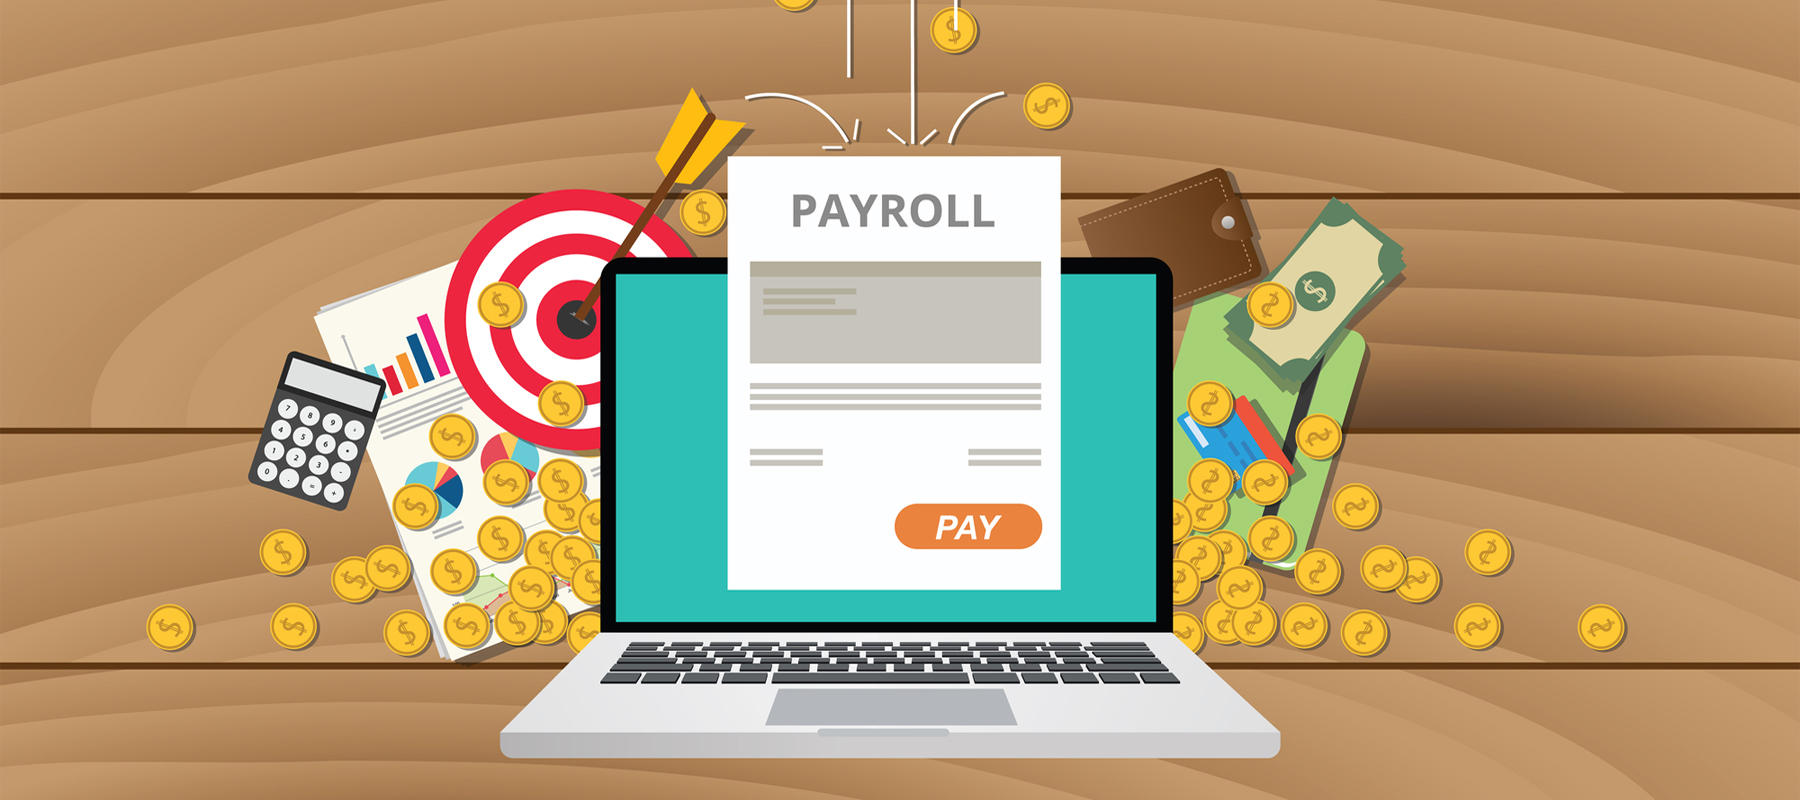 How Much Does Payroll Cost Per Month?